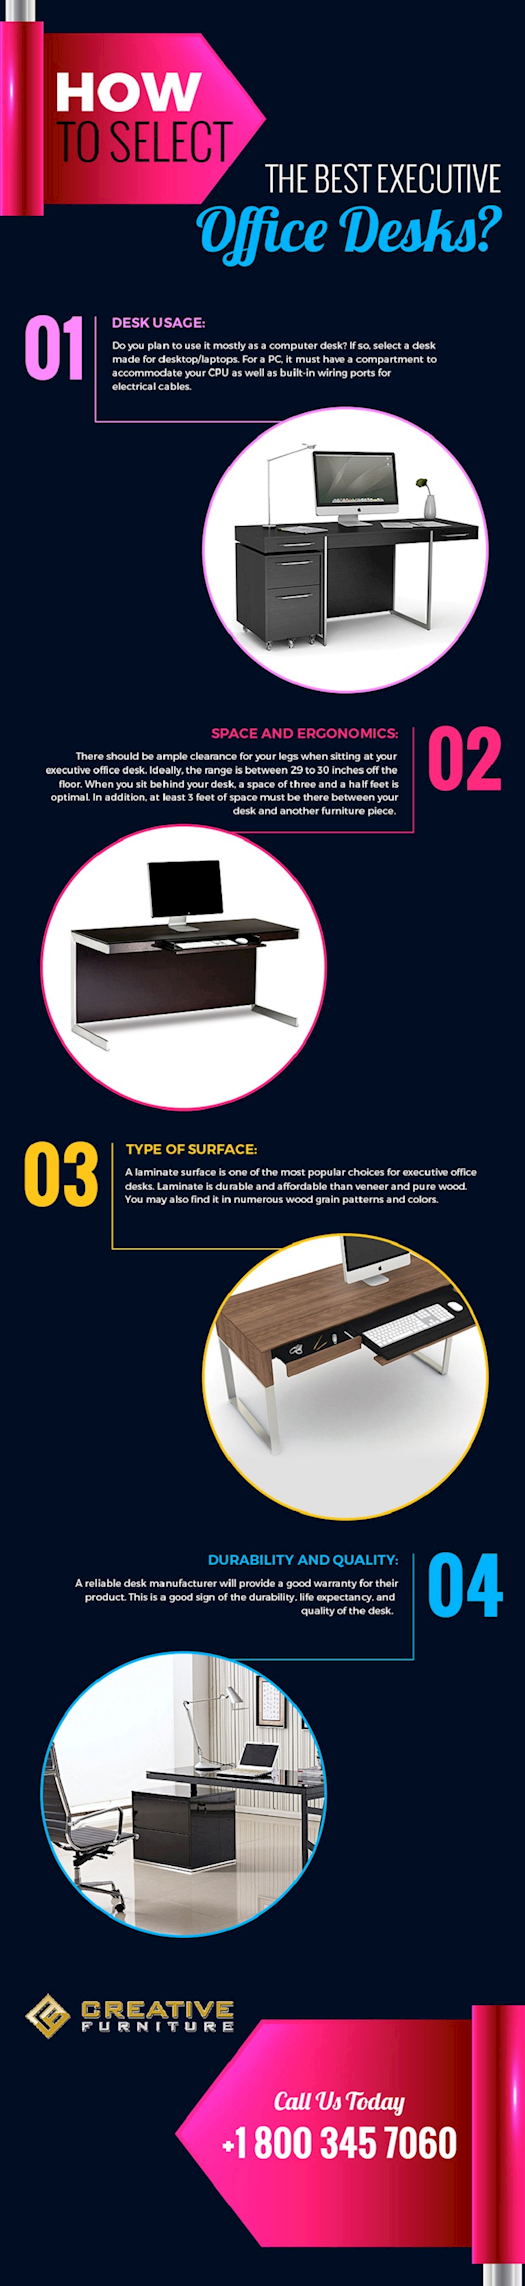 How To Select The Best Executive Office Desks